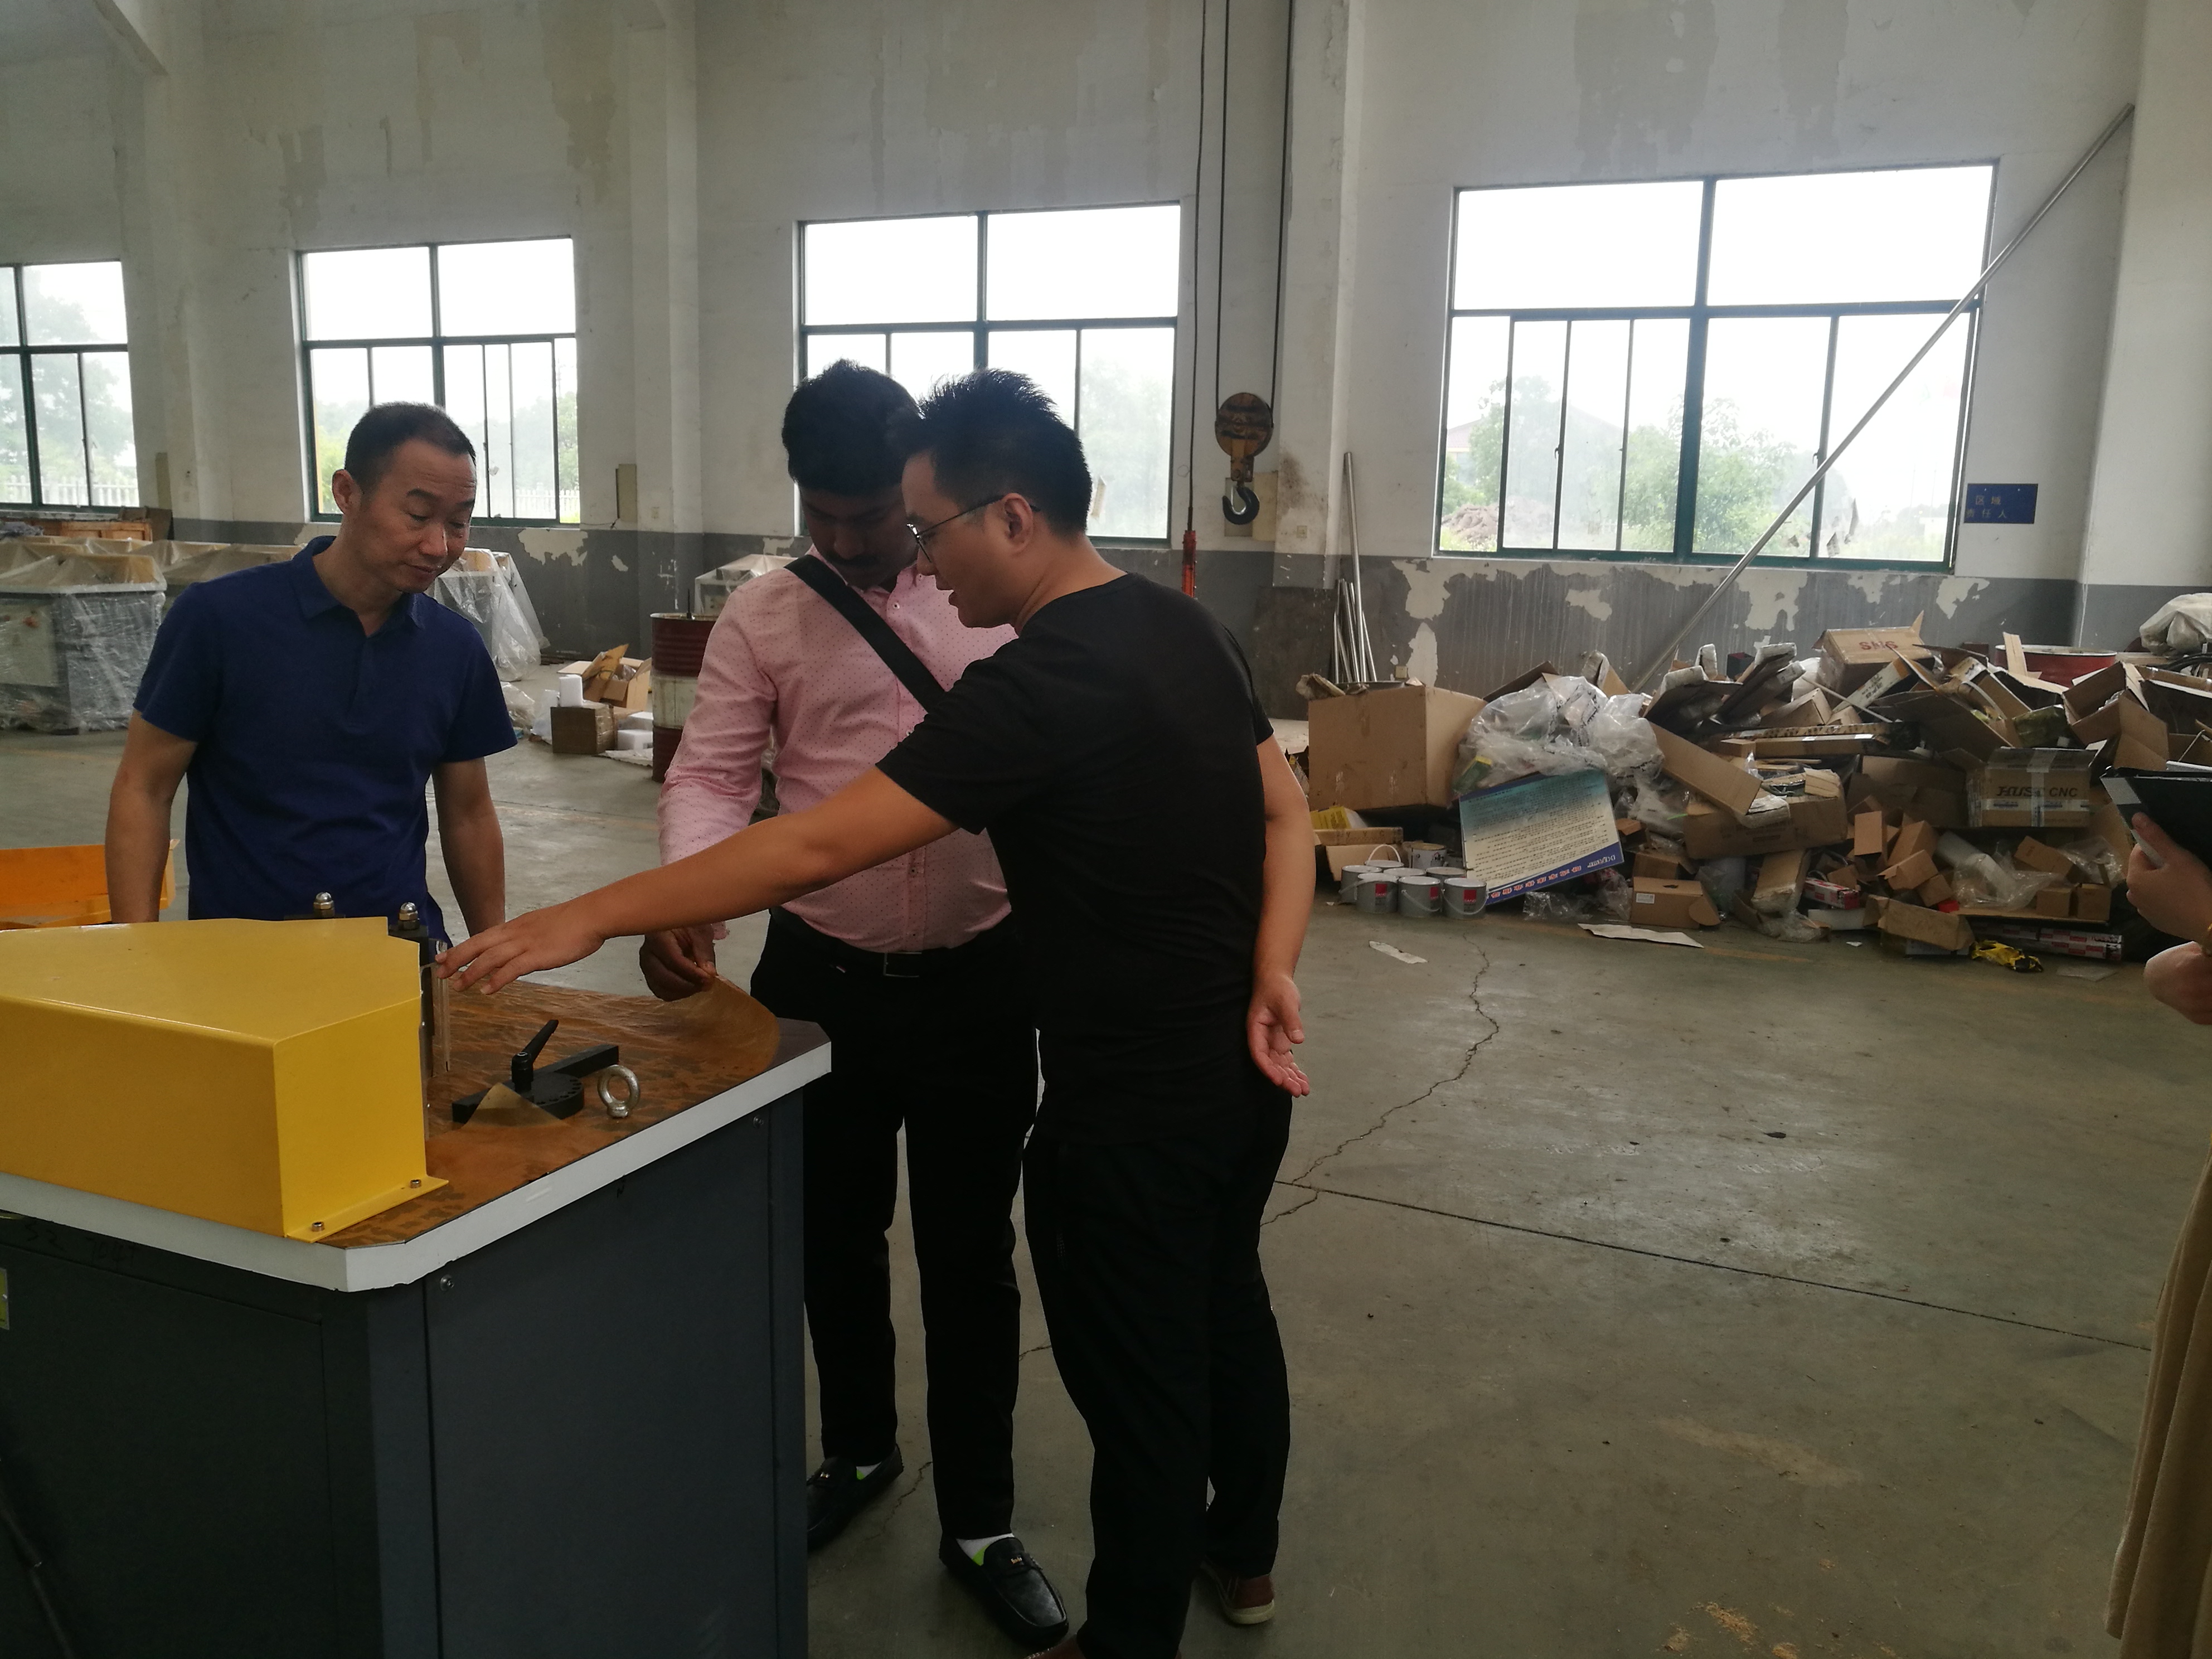 Customer from Dubai Come to Order the Fiber Laser Cutting Machine And V Groove Machine And Press Brake